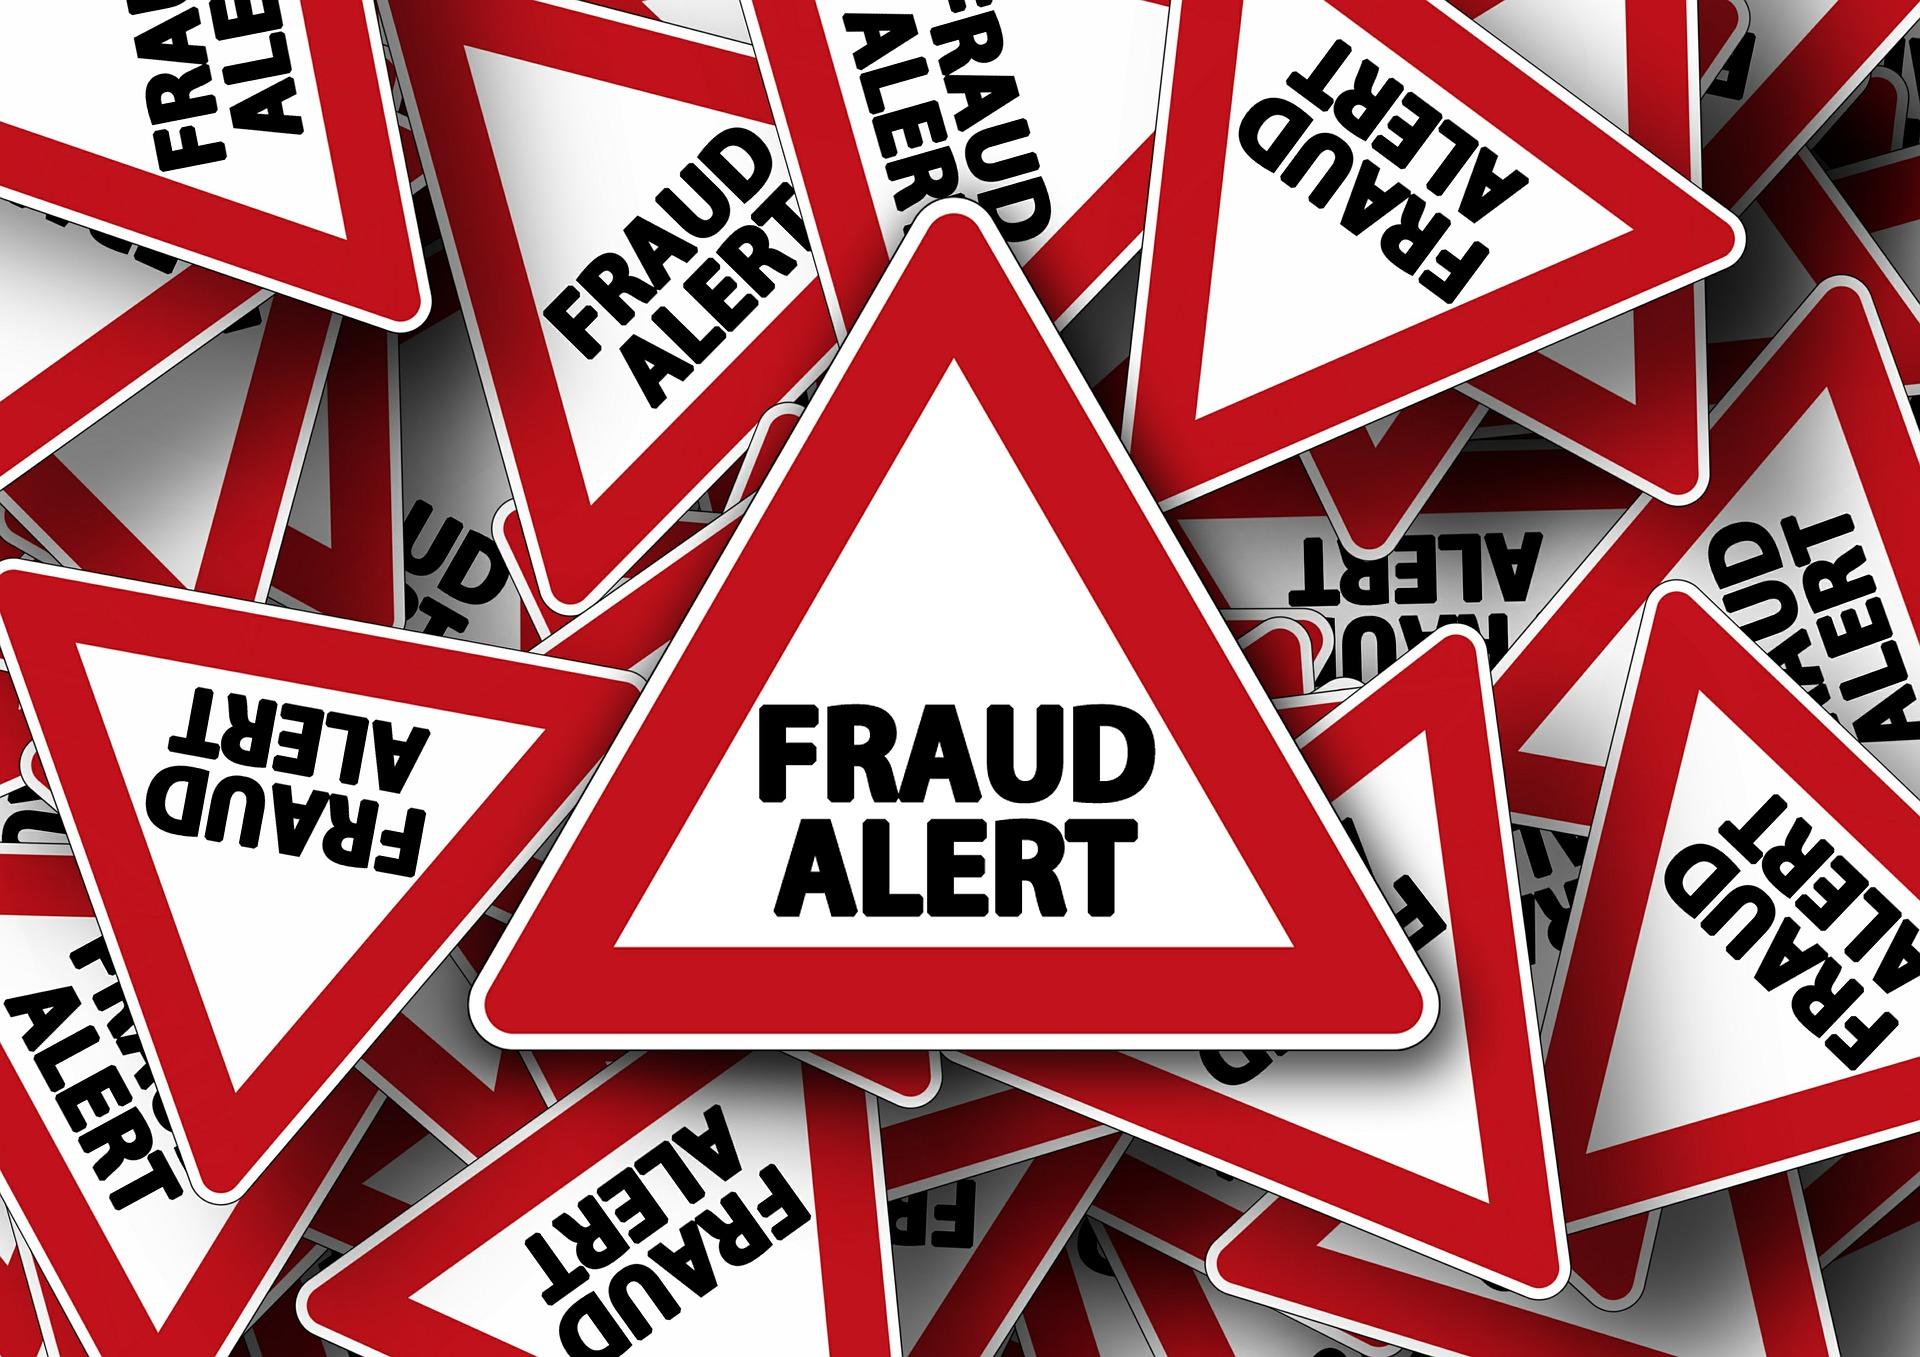 7 Forex Trading Scam Red Flags To Watch Out For